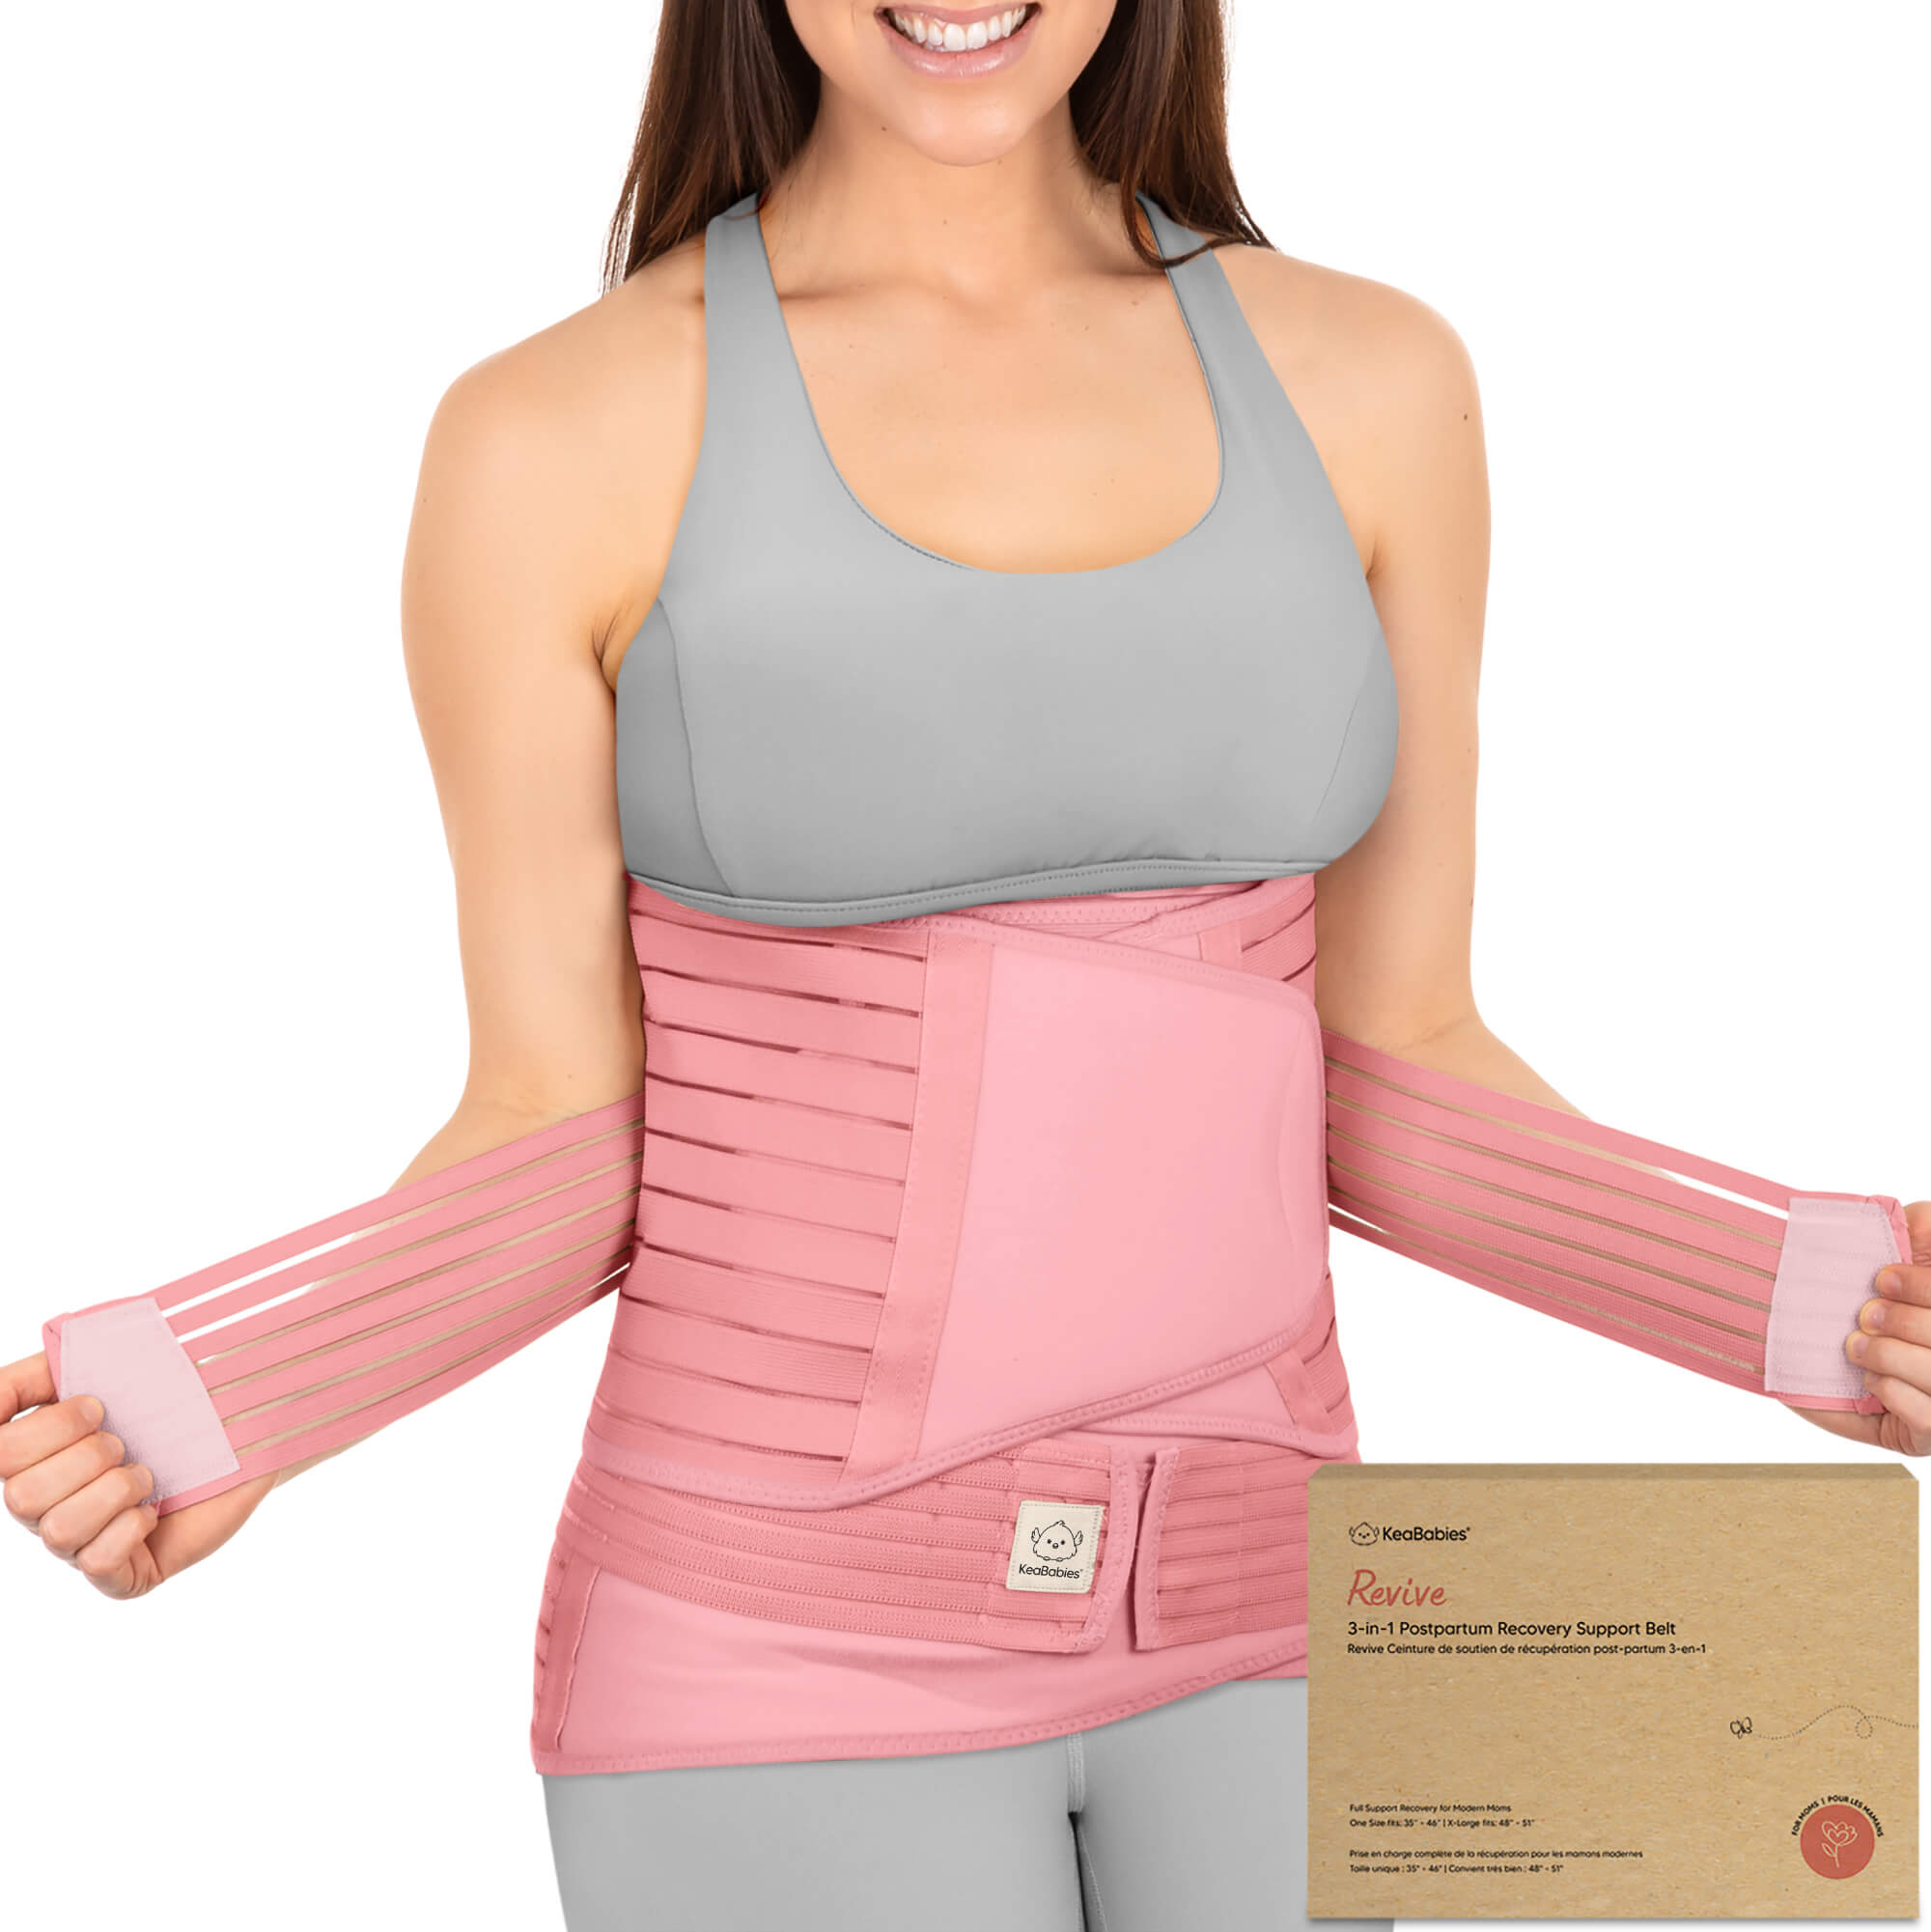 Getting Back to You & The Best Postpartum Shapewear - Exquisite Bodies